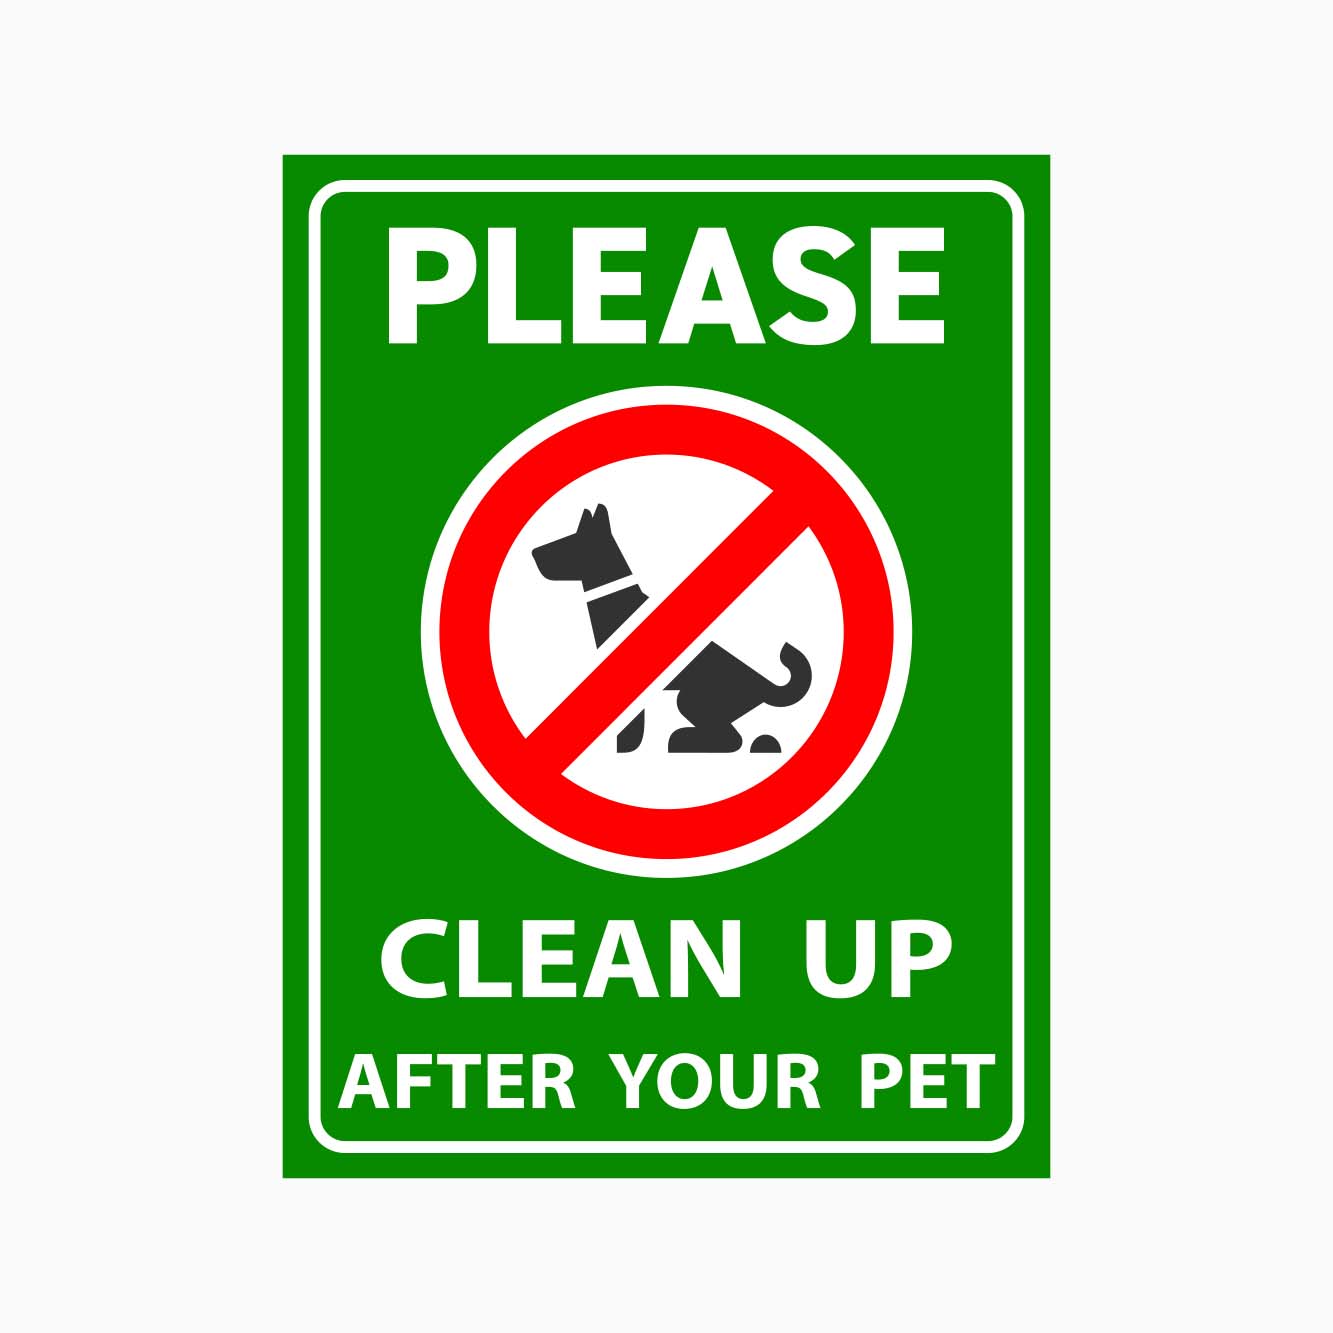 PLEASE CLEAN UP AFTER YOUR PET SIGN - GET SIGNS